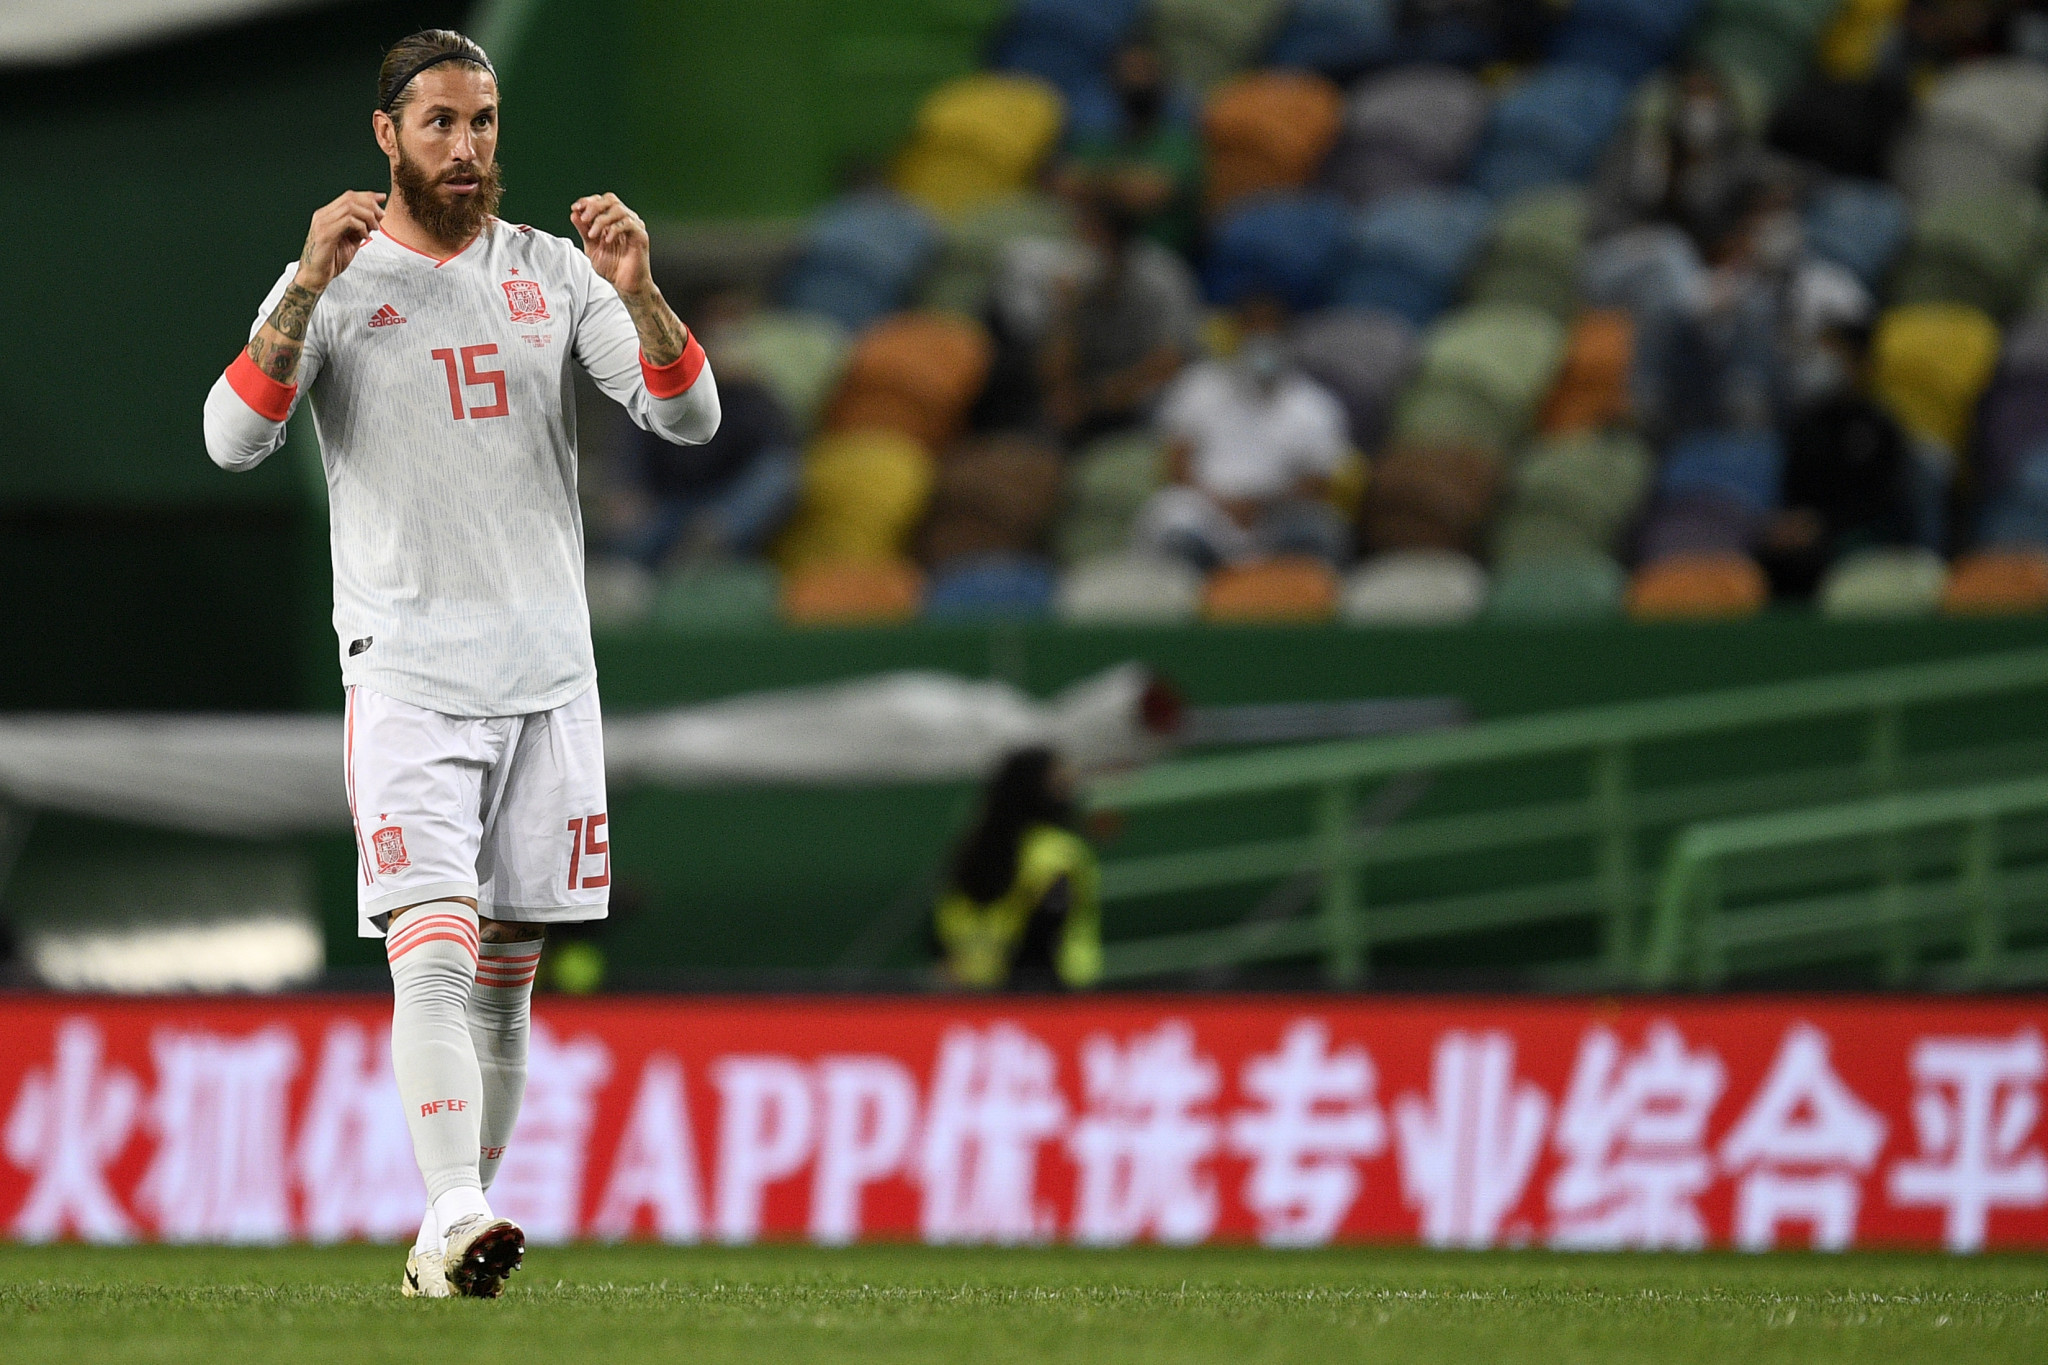 Spanish Football Federation keen for Ramos to compete at Tokyo 2020